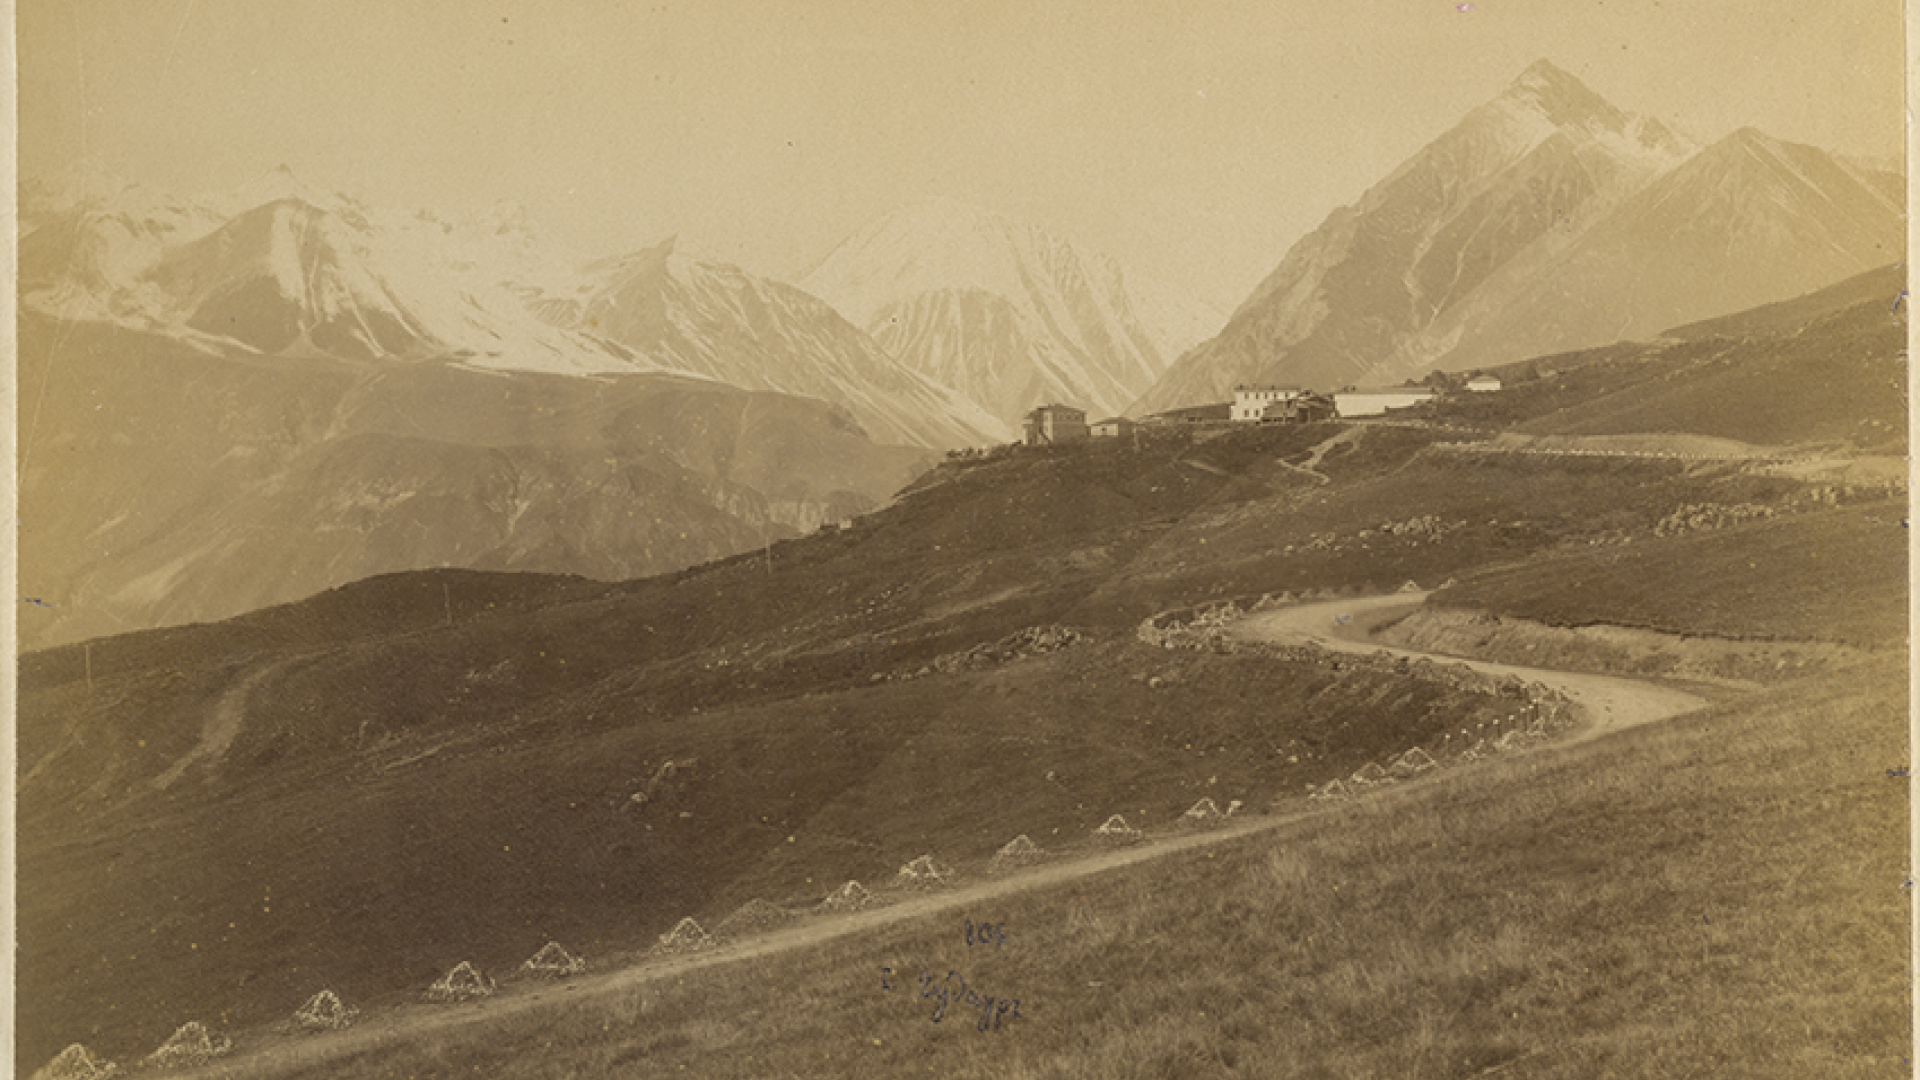 The unknown photographer Jaroslav Tkadlec (1851—1927) and his travels through the Caucasus